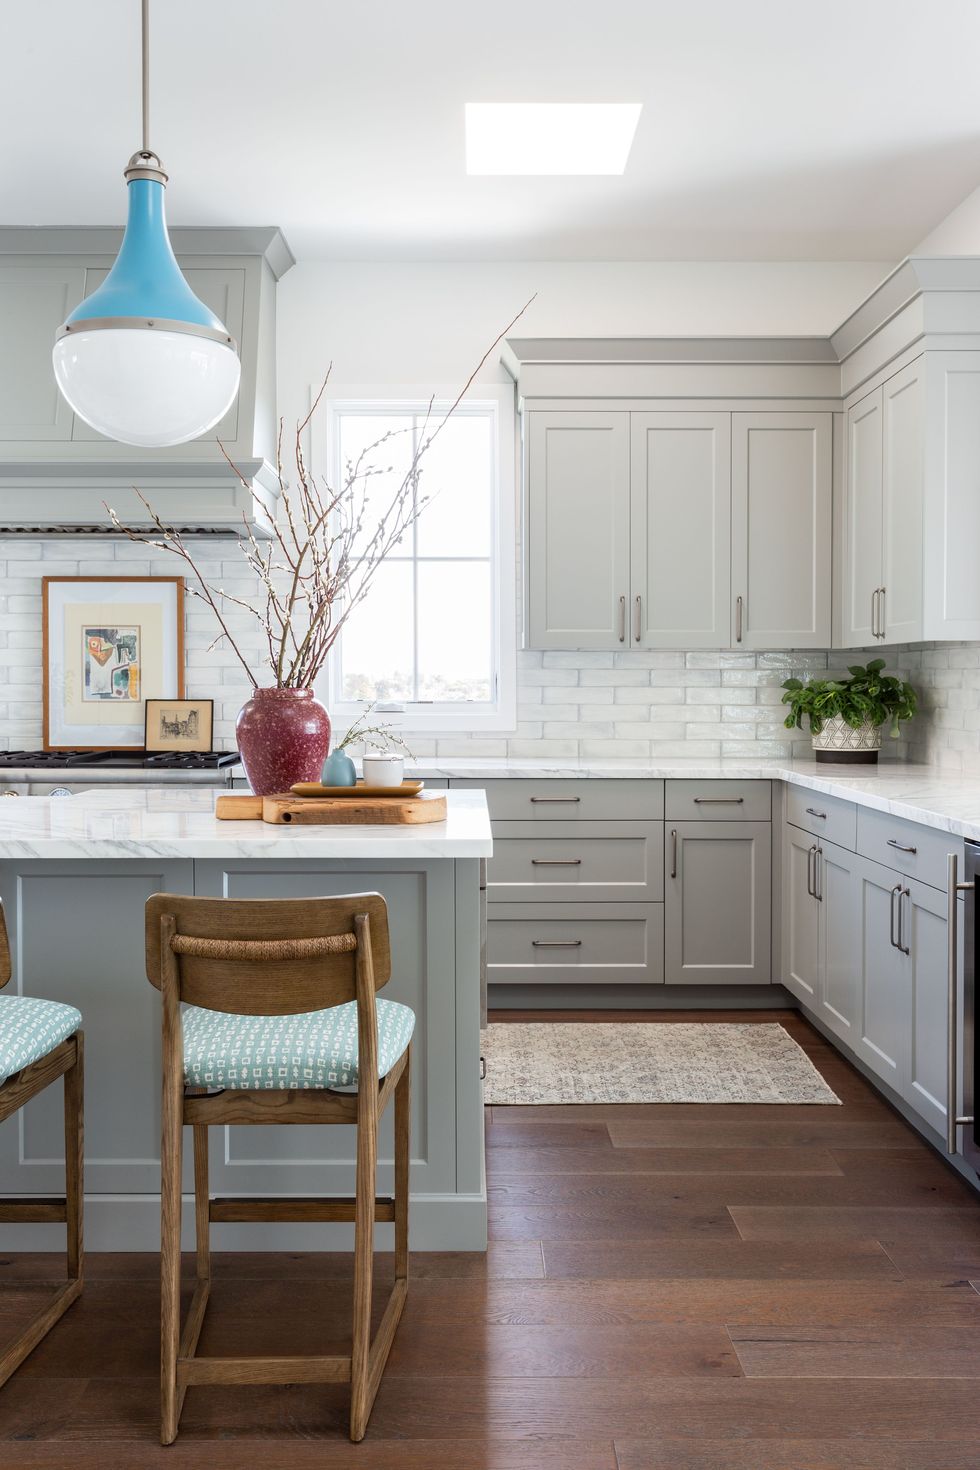 gray cabinets with bold blue pendant